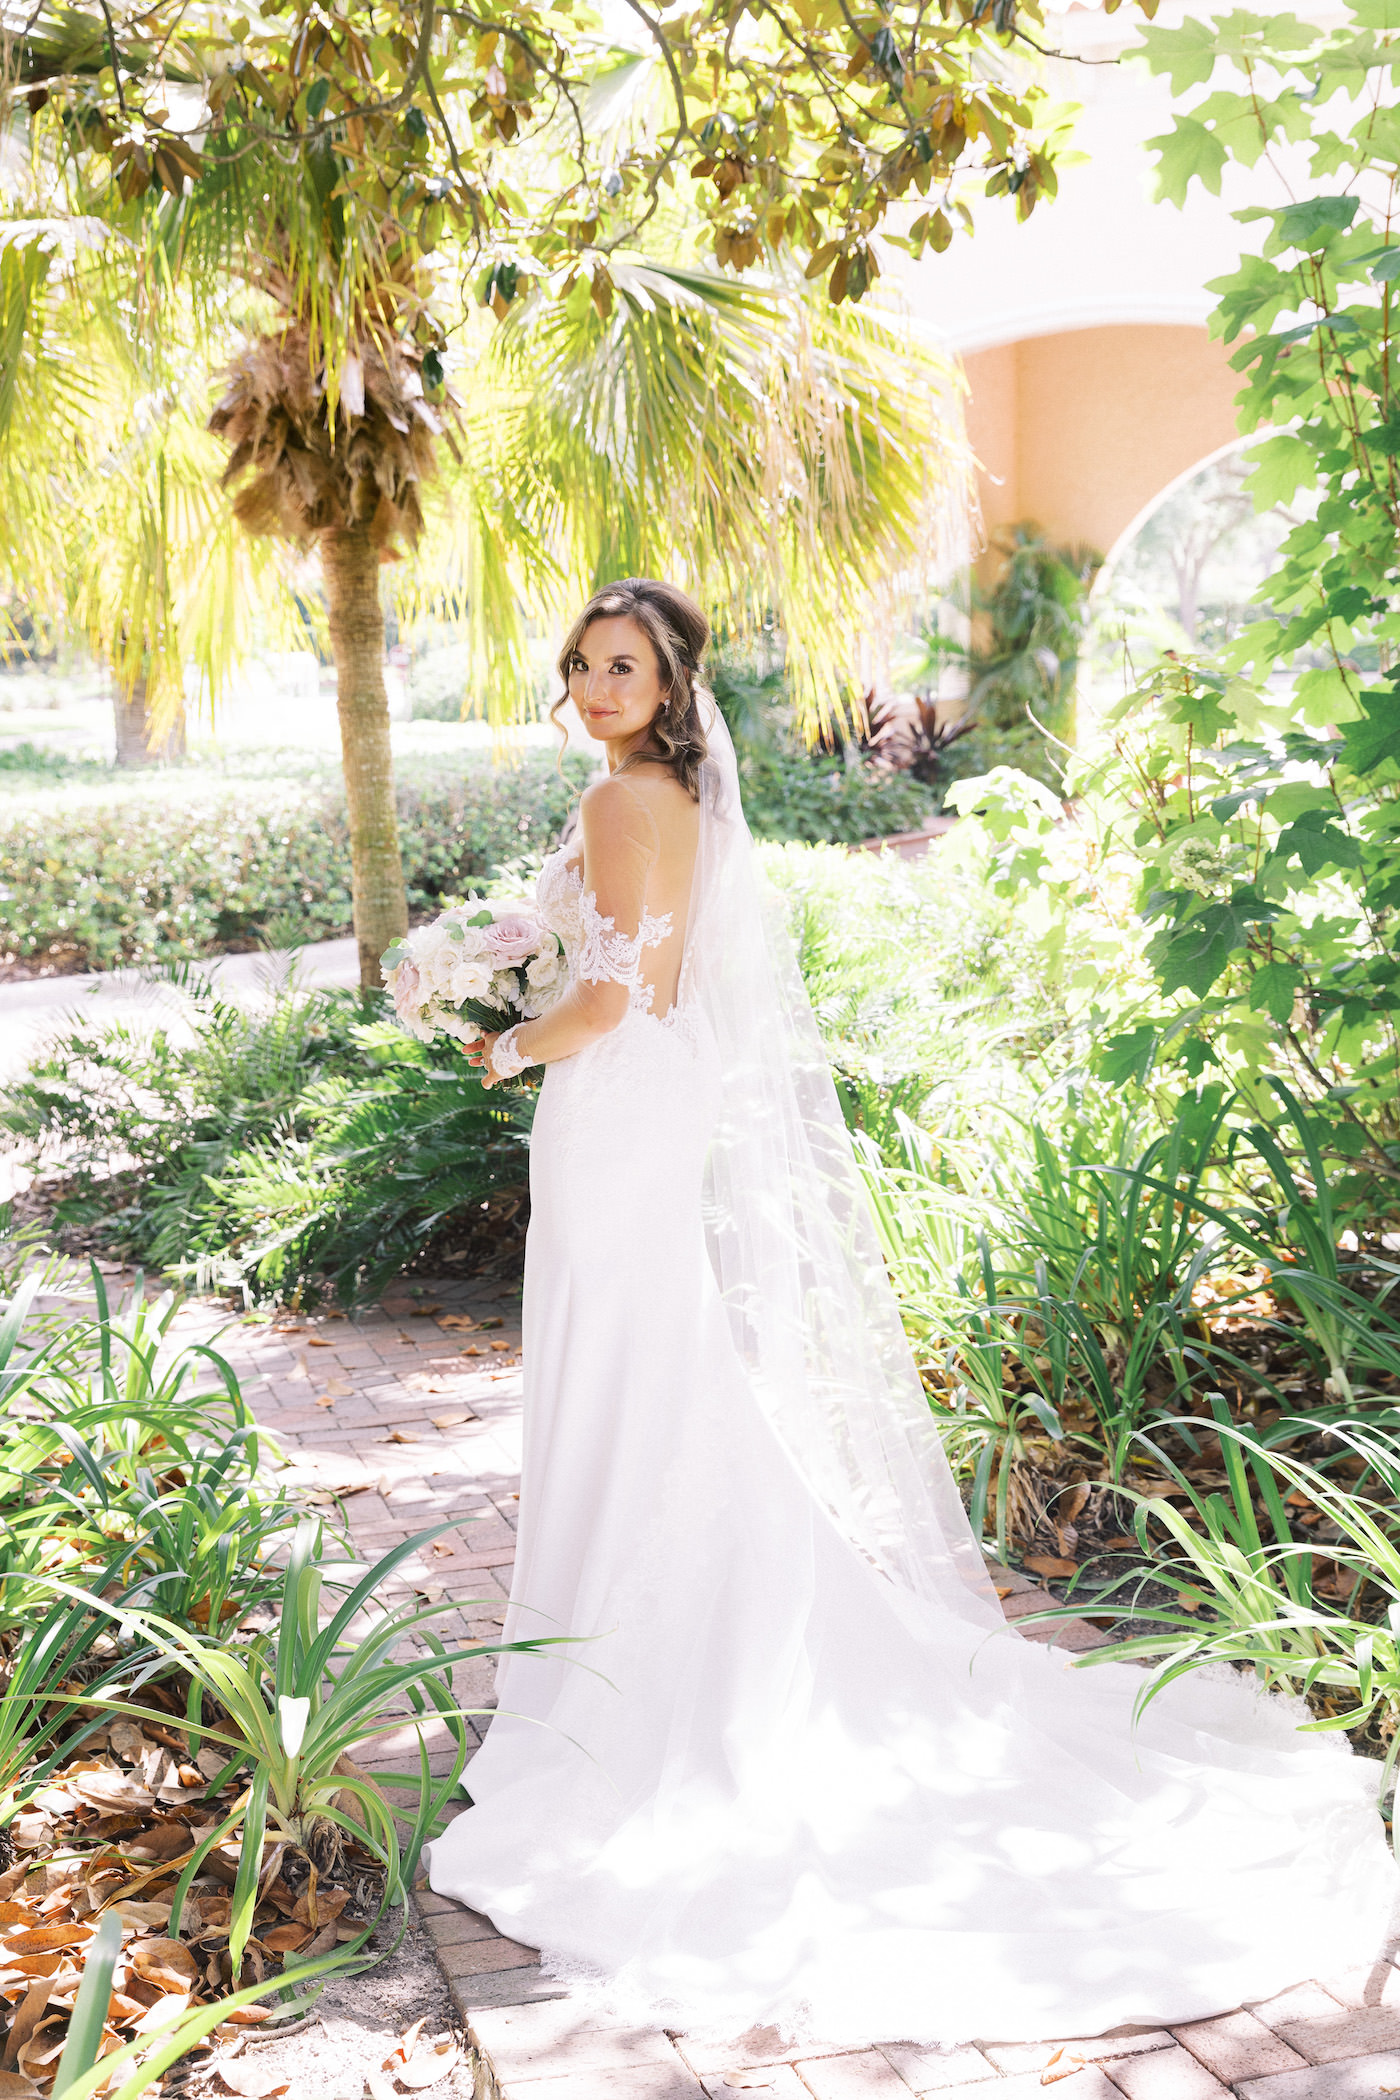 Ines di Santo Designer Bridal Gown Illusion Lace Sexy Wedding Dress | Outdoor Bridal Portrait at Tampa Wedding Venue Avila Golf & Country Club | White and Blush Pink Round Rose Bridal Bouquet | Isabel O'Neil Bridal Collection | Tampa Wedding Hair and Makeup Femme Akoi Beauty Studio